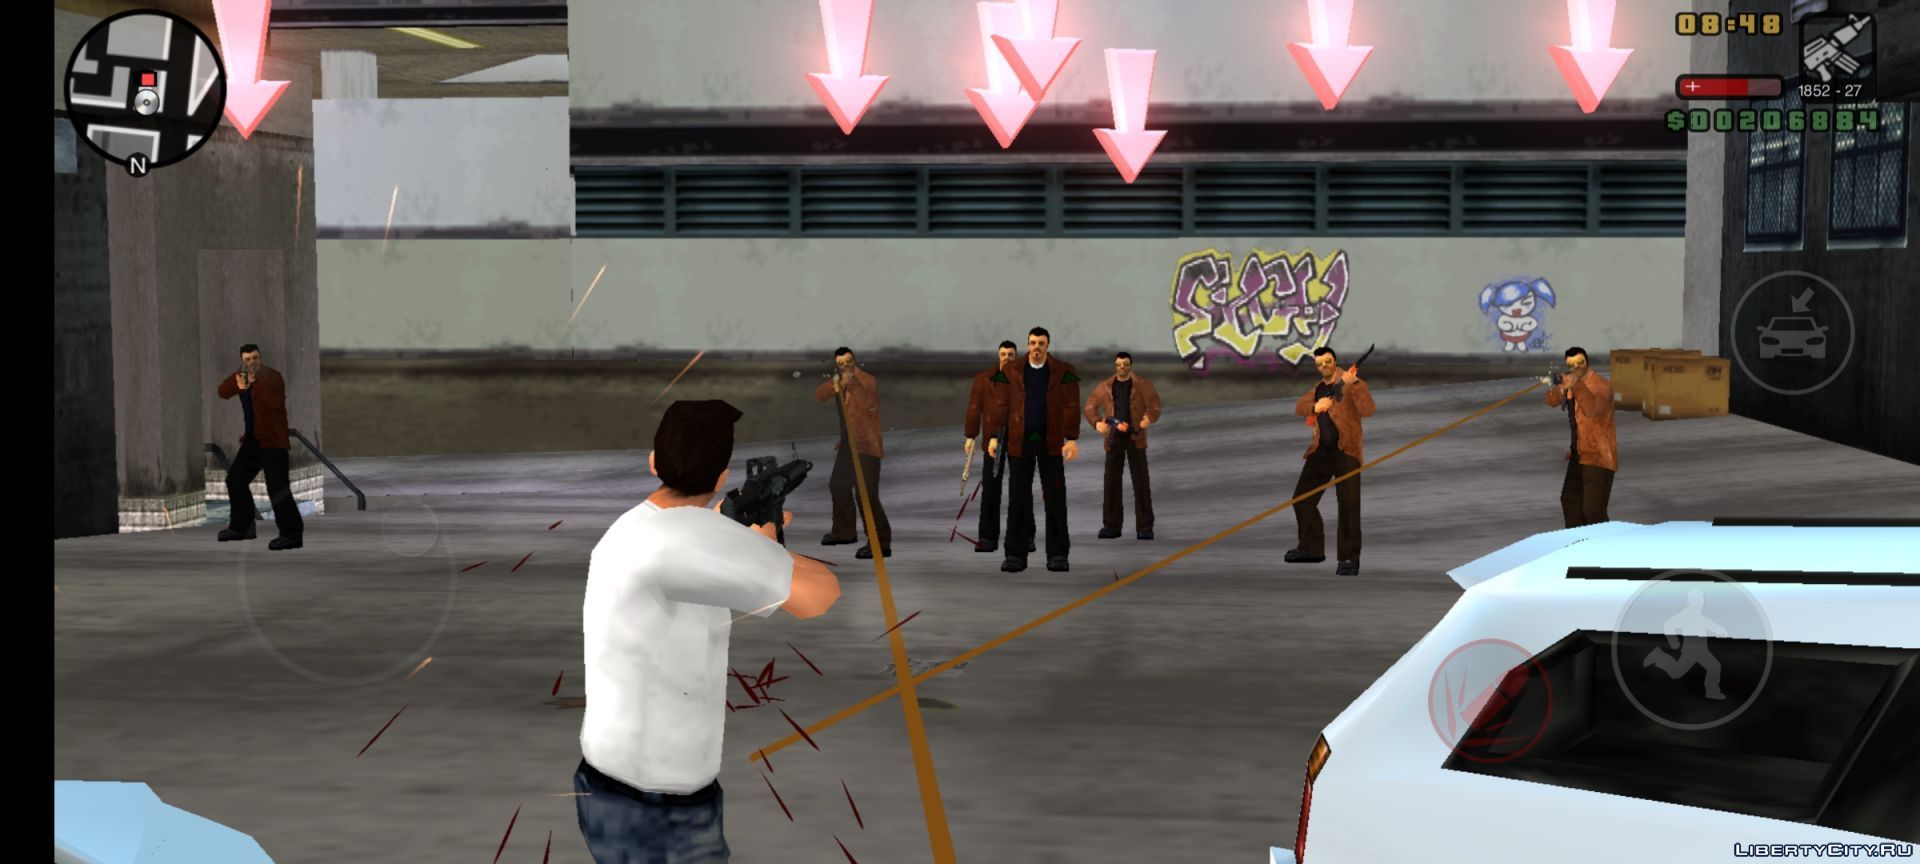 Download PS2 Textures for GTA LCS Mobile Android for GTA Liberty